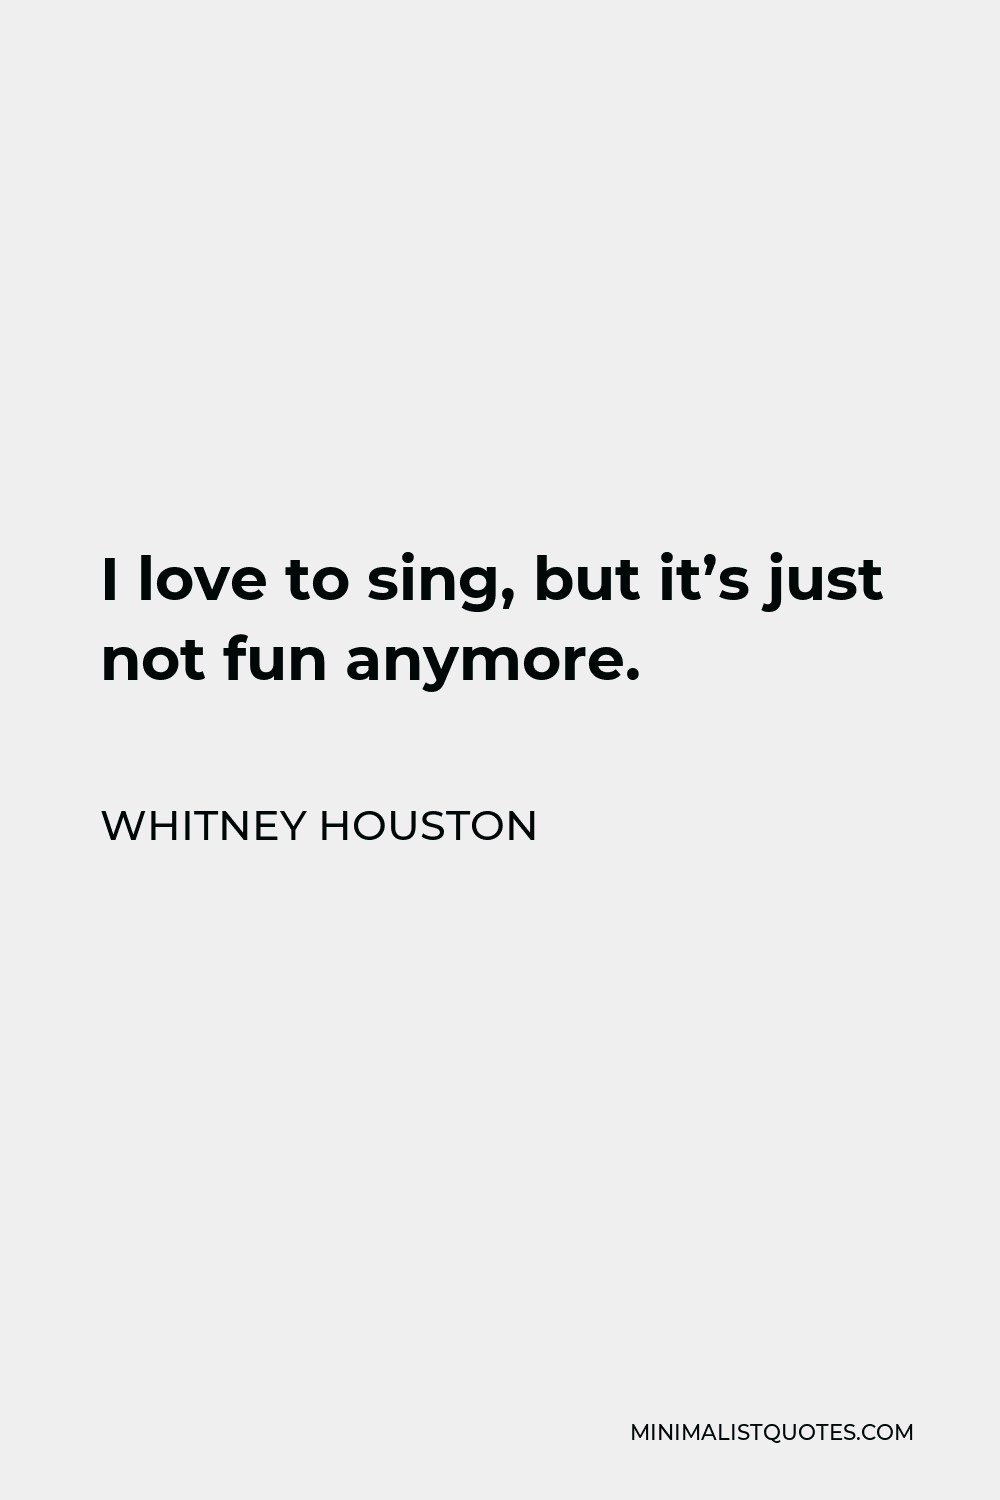 Whitney Houston Quote - I love to sing, but it’s just not fun anymore.